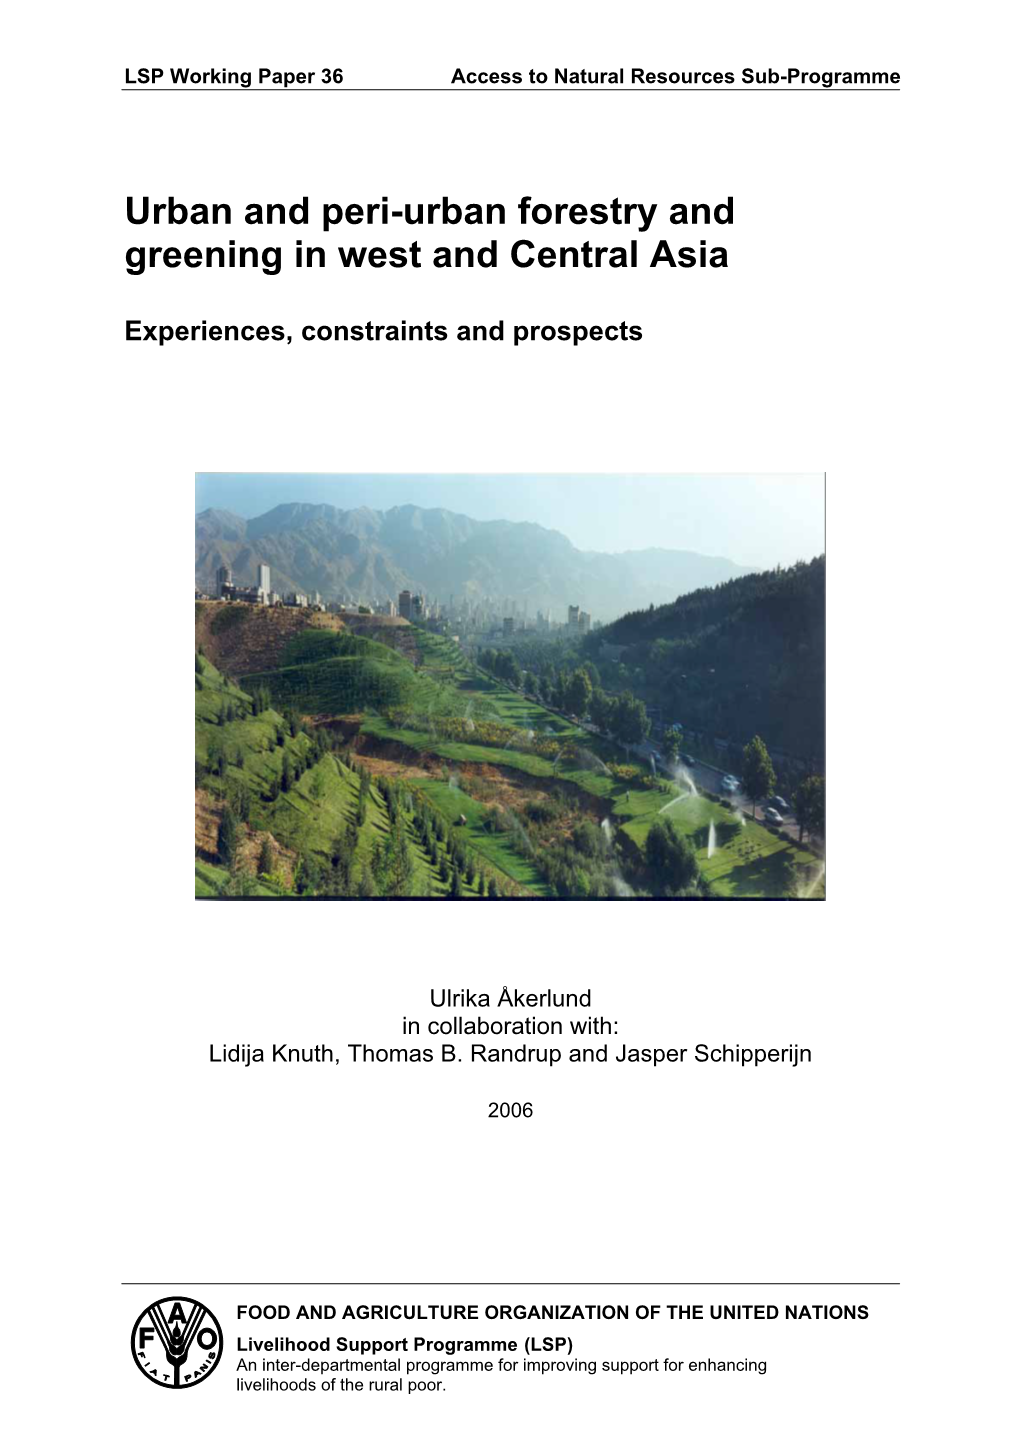 Urban and Peri-Urban Forestry and Greening in West and Central Asia